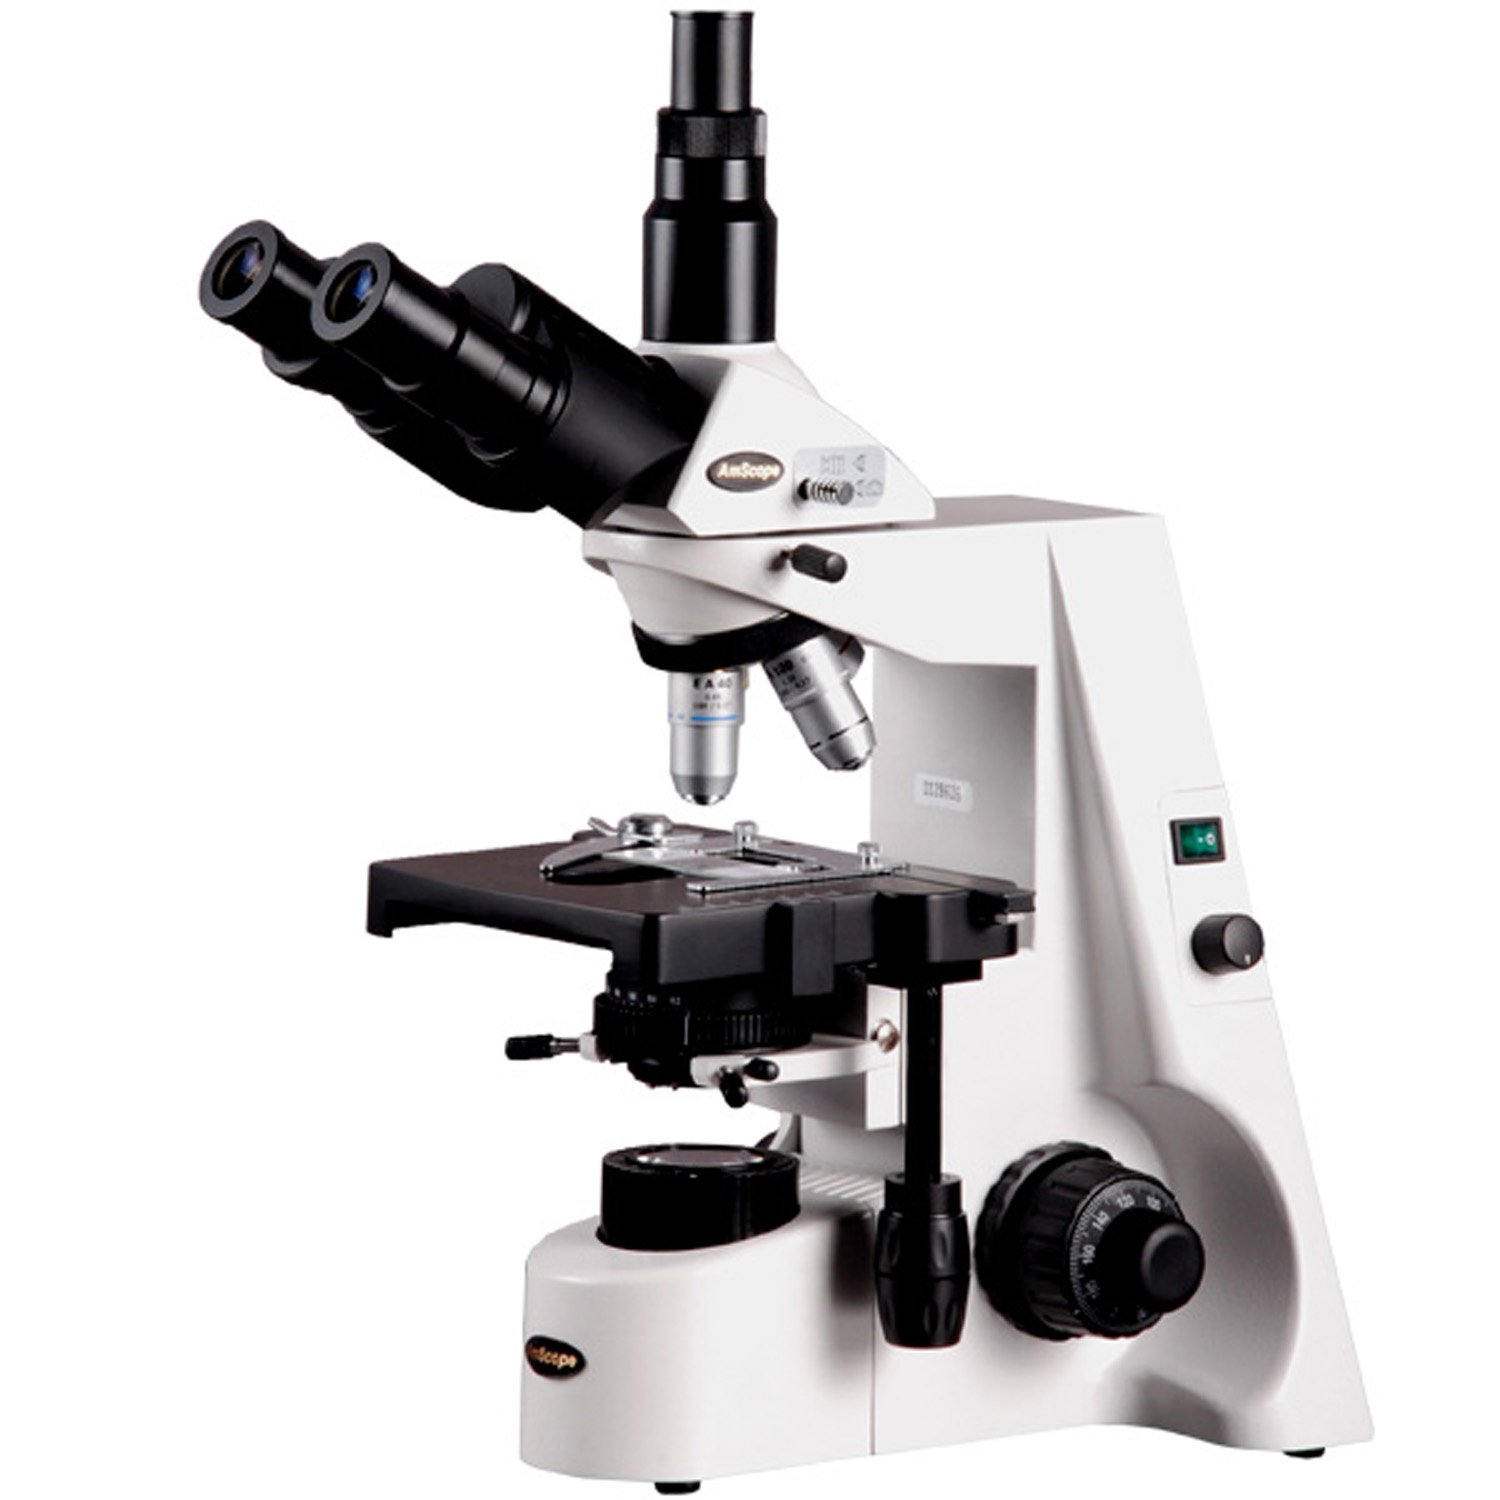 AmScope T690B-PL Trinocular compound Microscope, 40X-2000X Magnification, WH10x and WH20x Super-Widefield Eyepieces, Infinity Pl